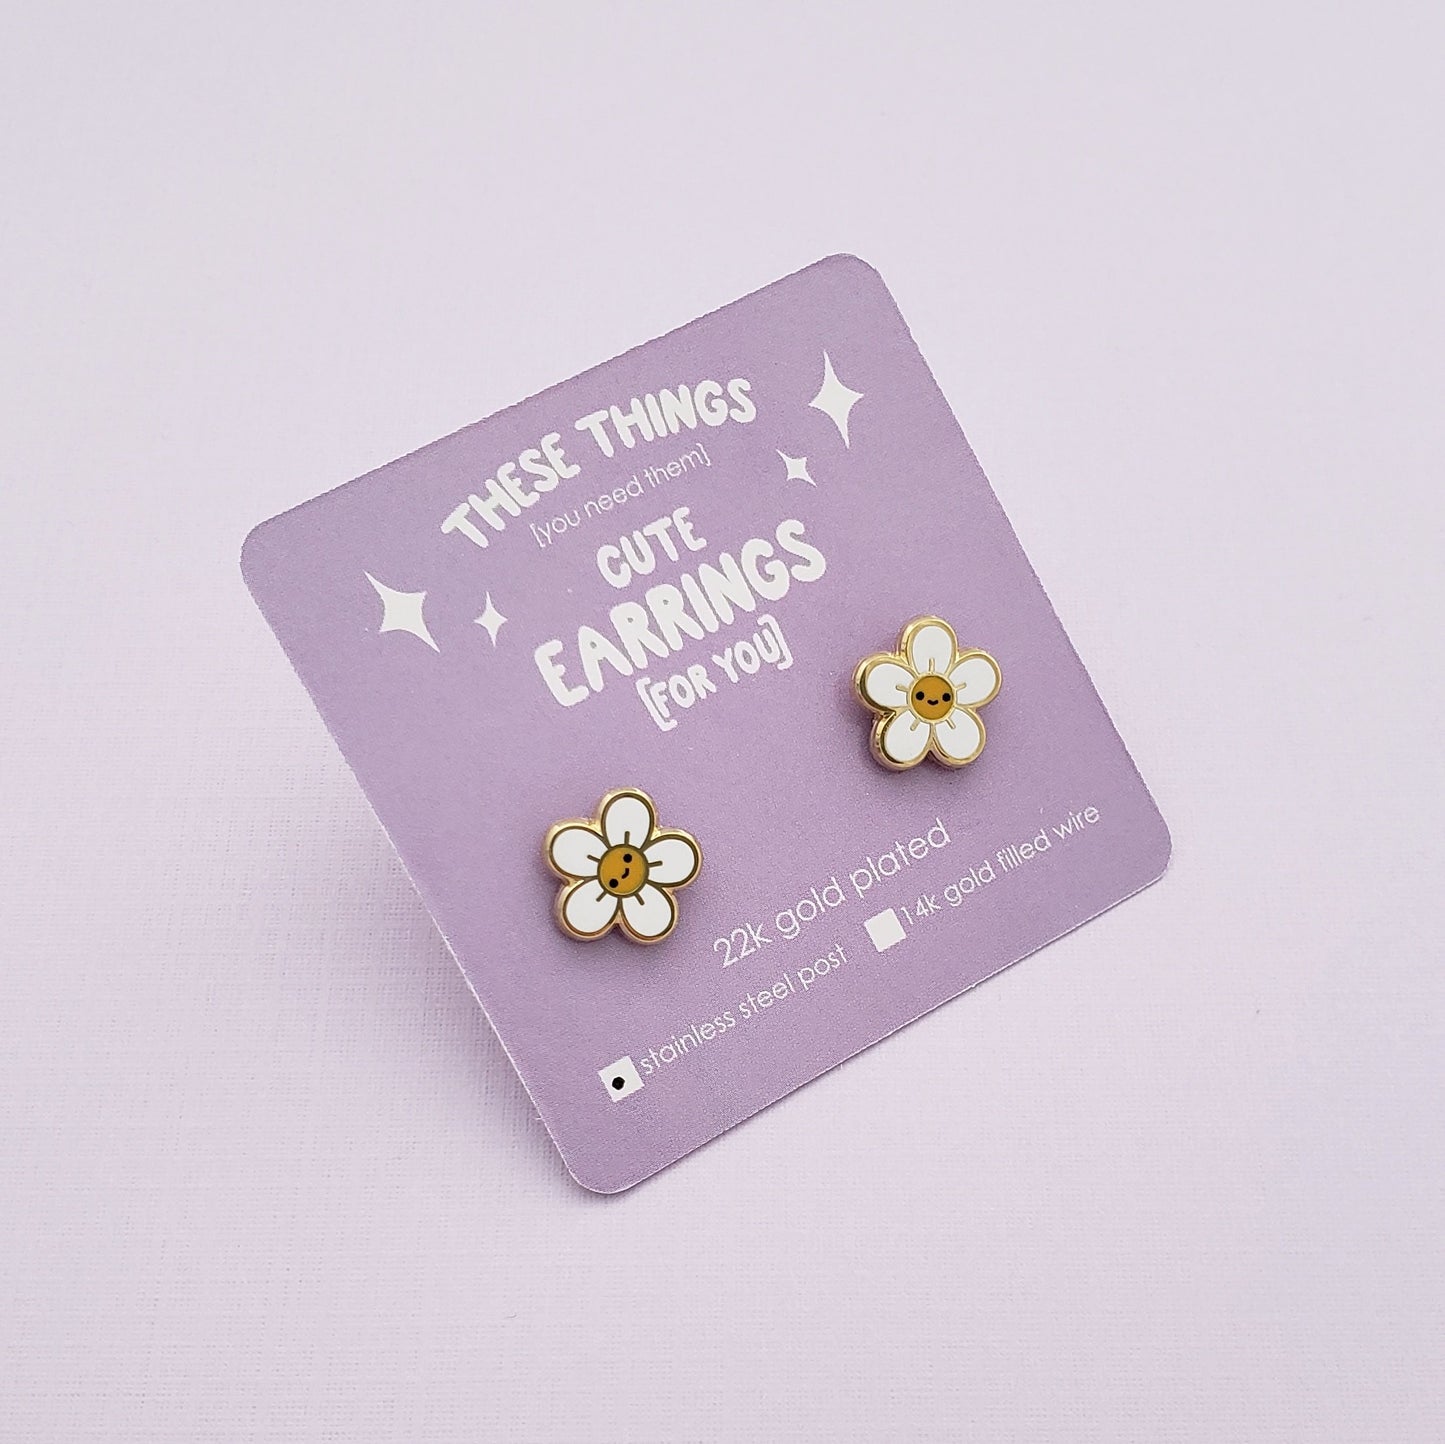 Happy Flower earrings // cute white and yellow flowers